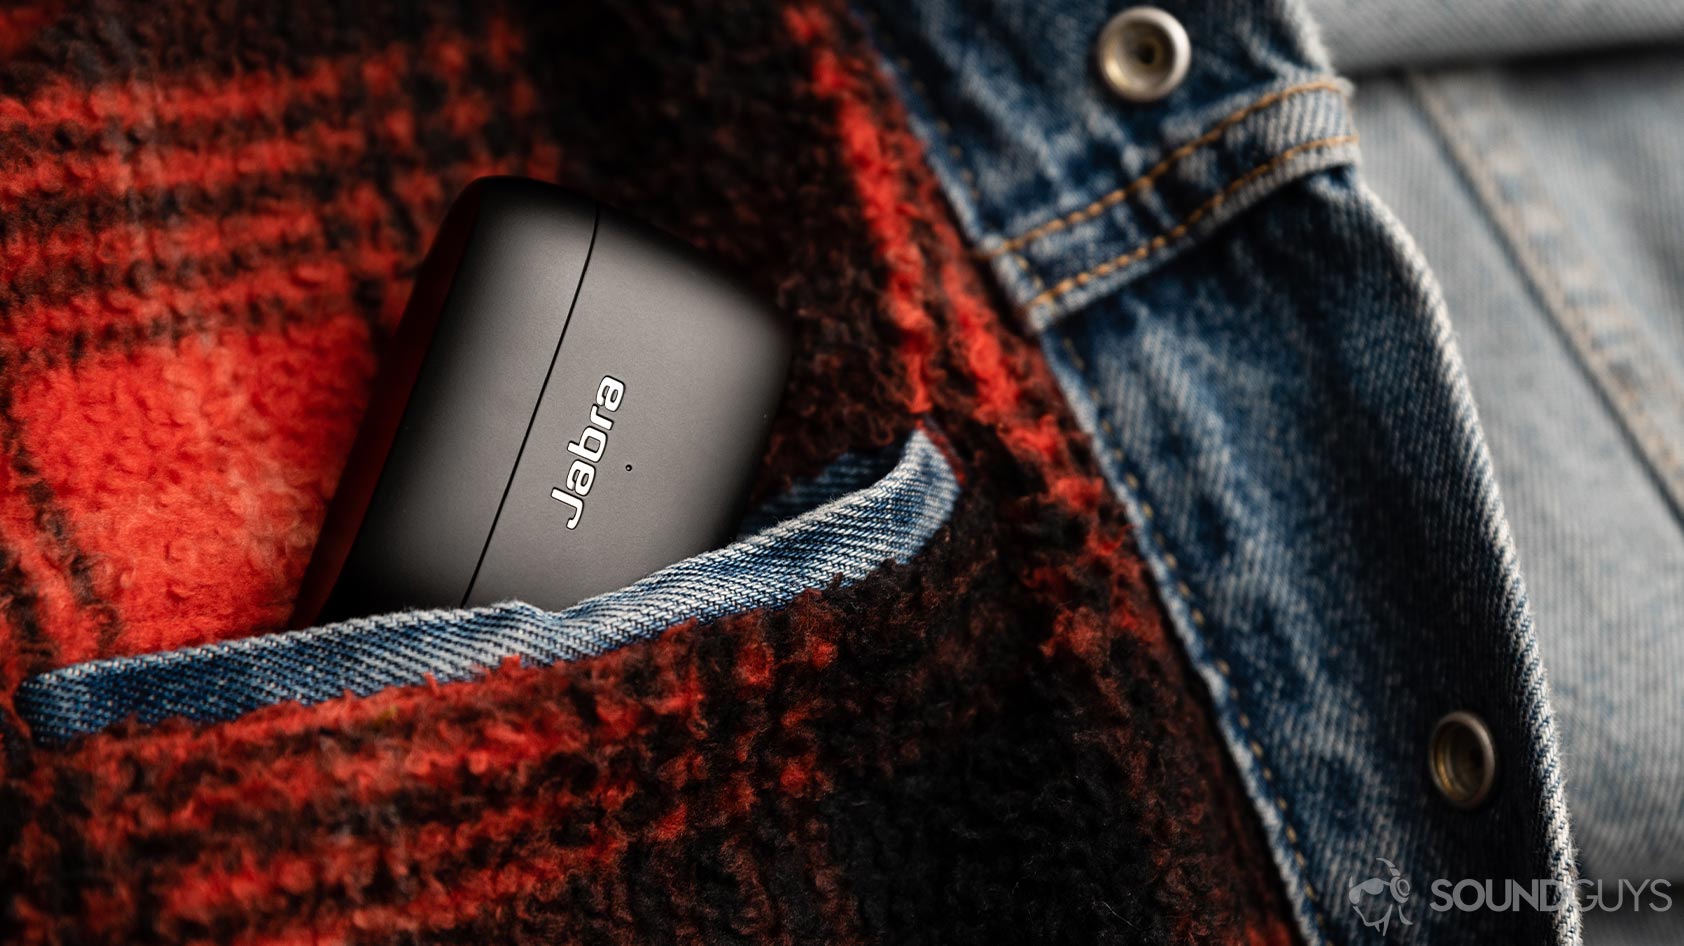 The Jabra Elite 85t noise canceling true wireless earbuds case coming out of an interior jacket pocket.